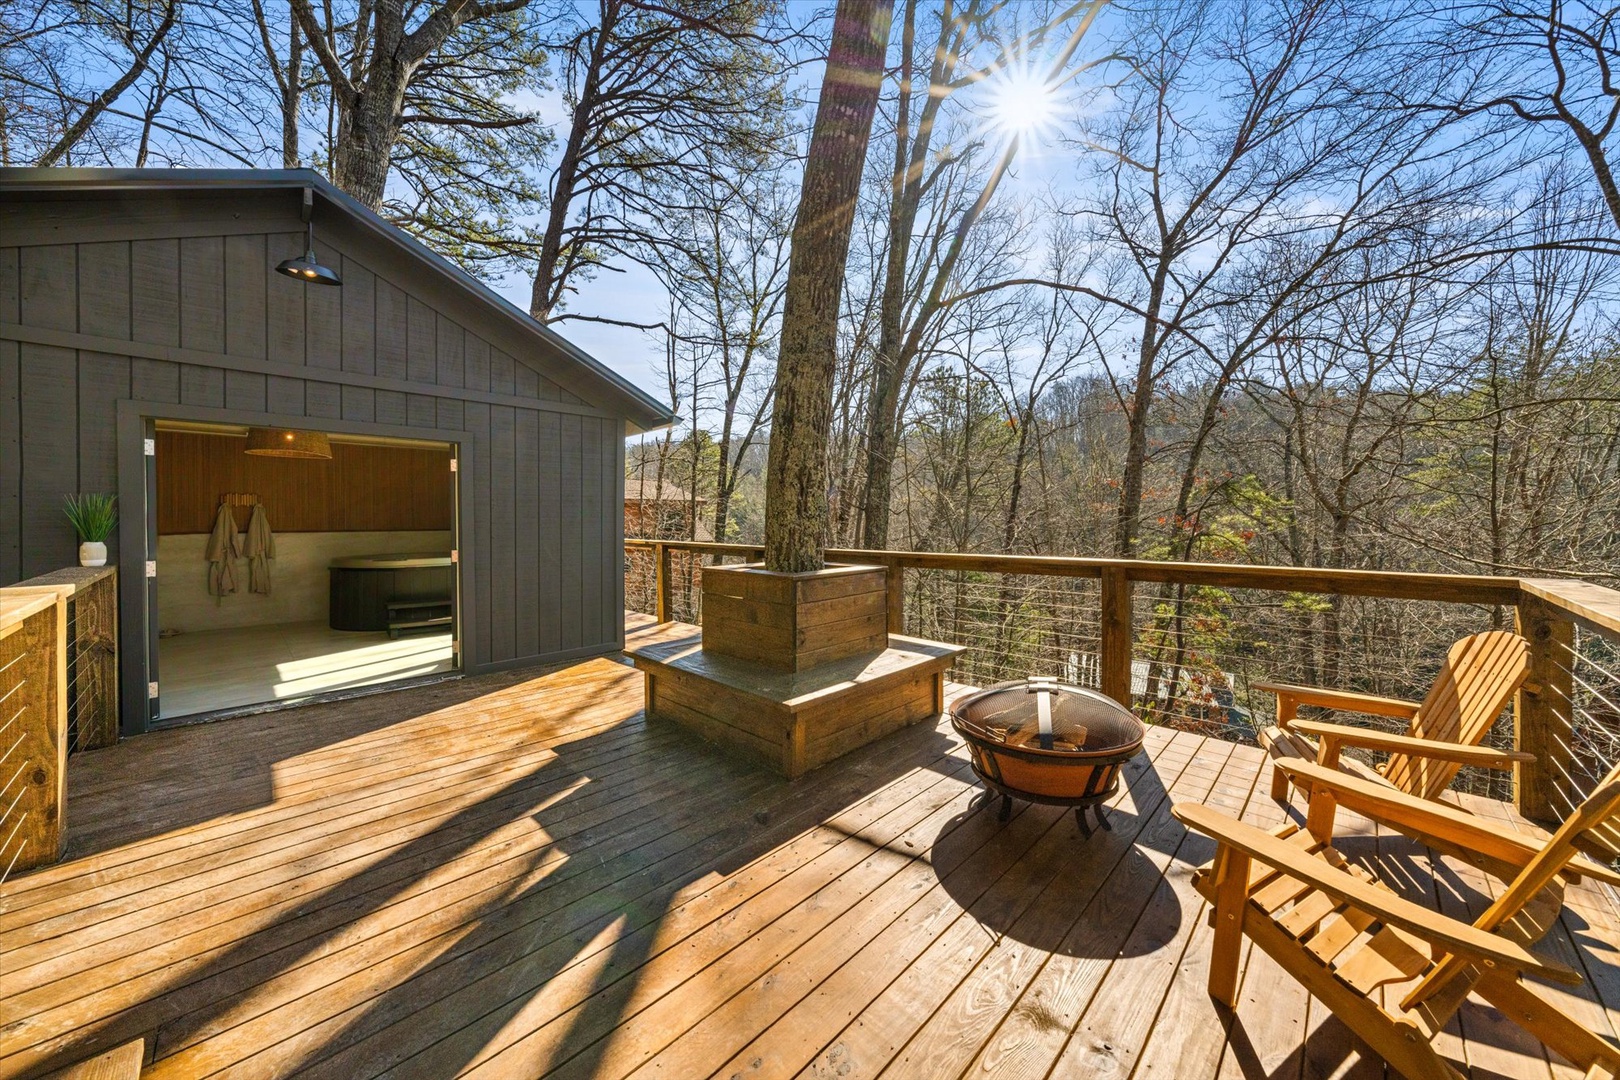 Lounge by the firepit in the sunshine on the oversized, treehouse-like deck